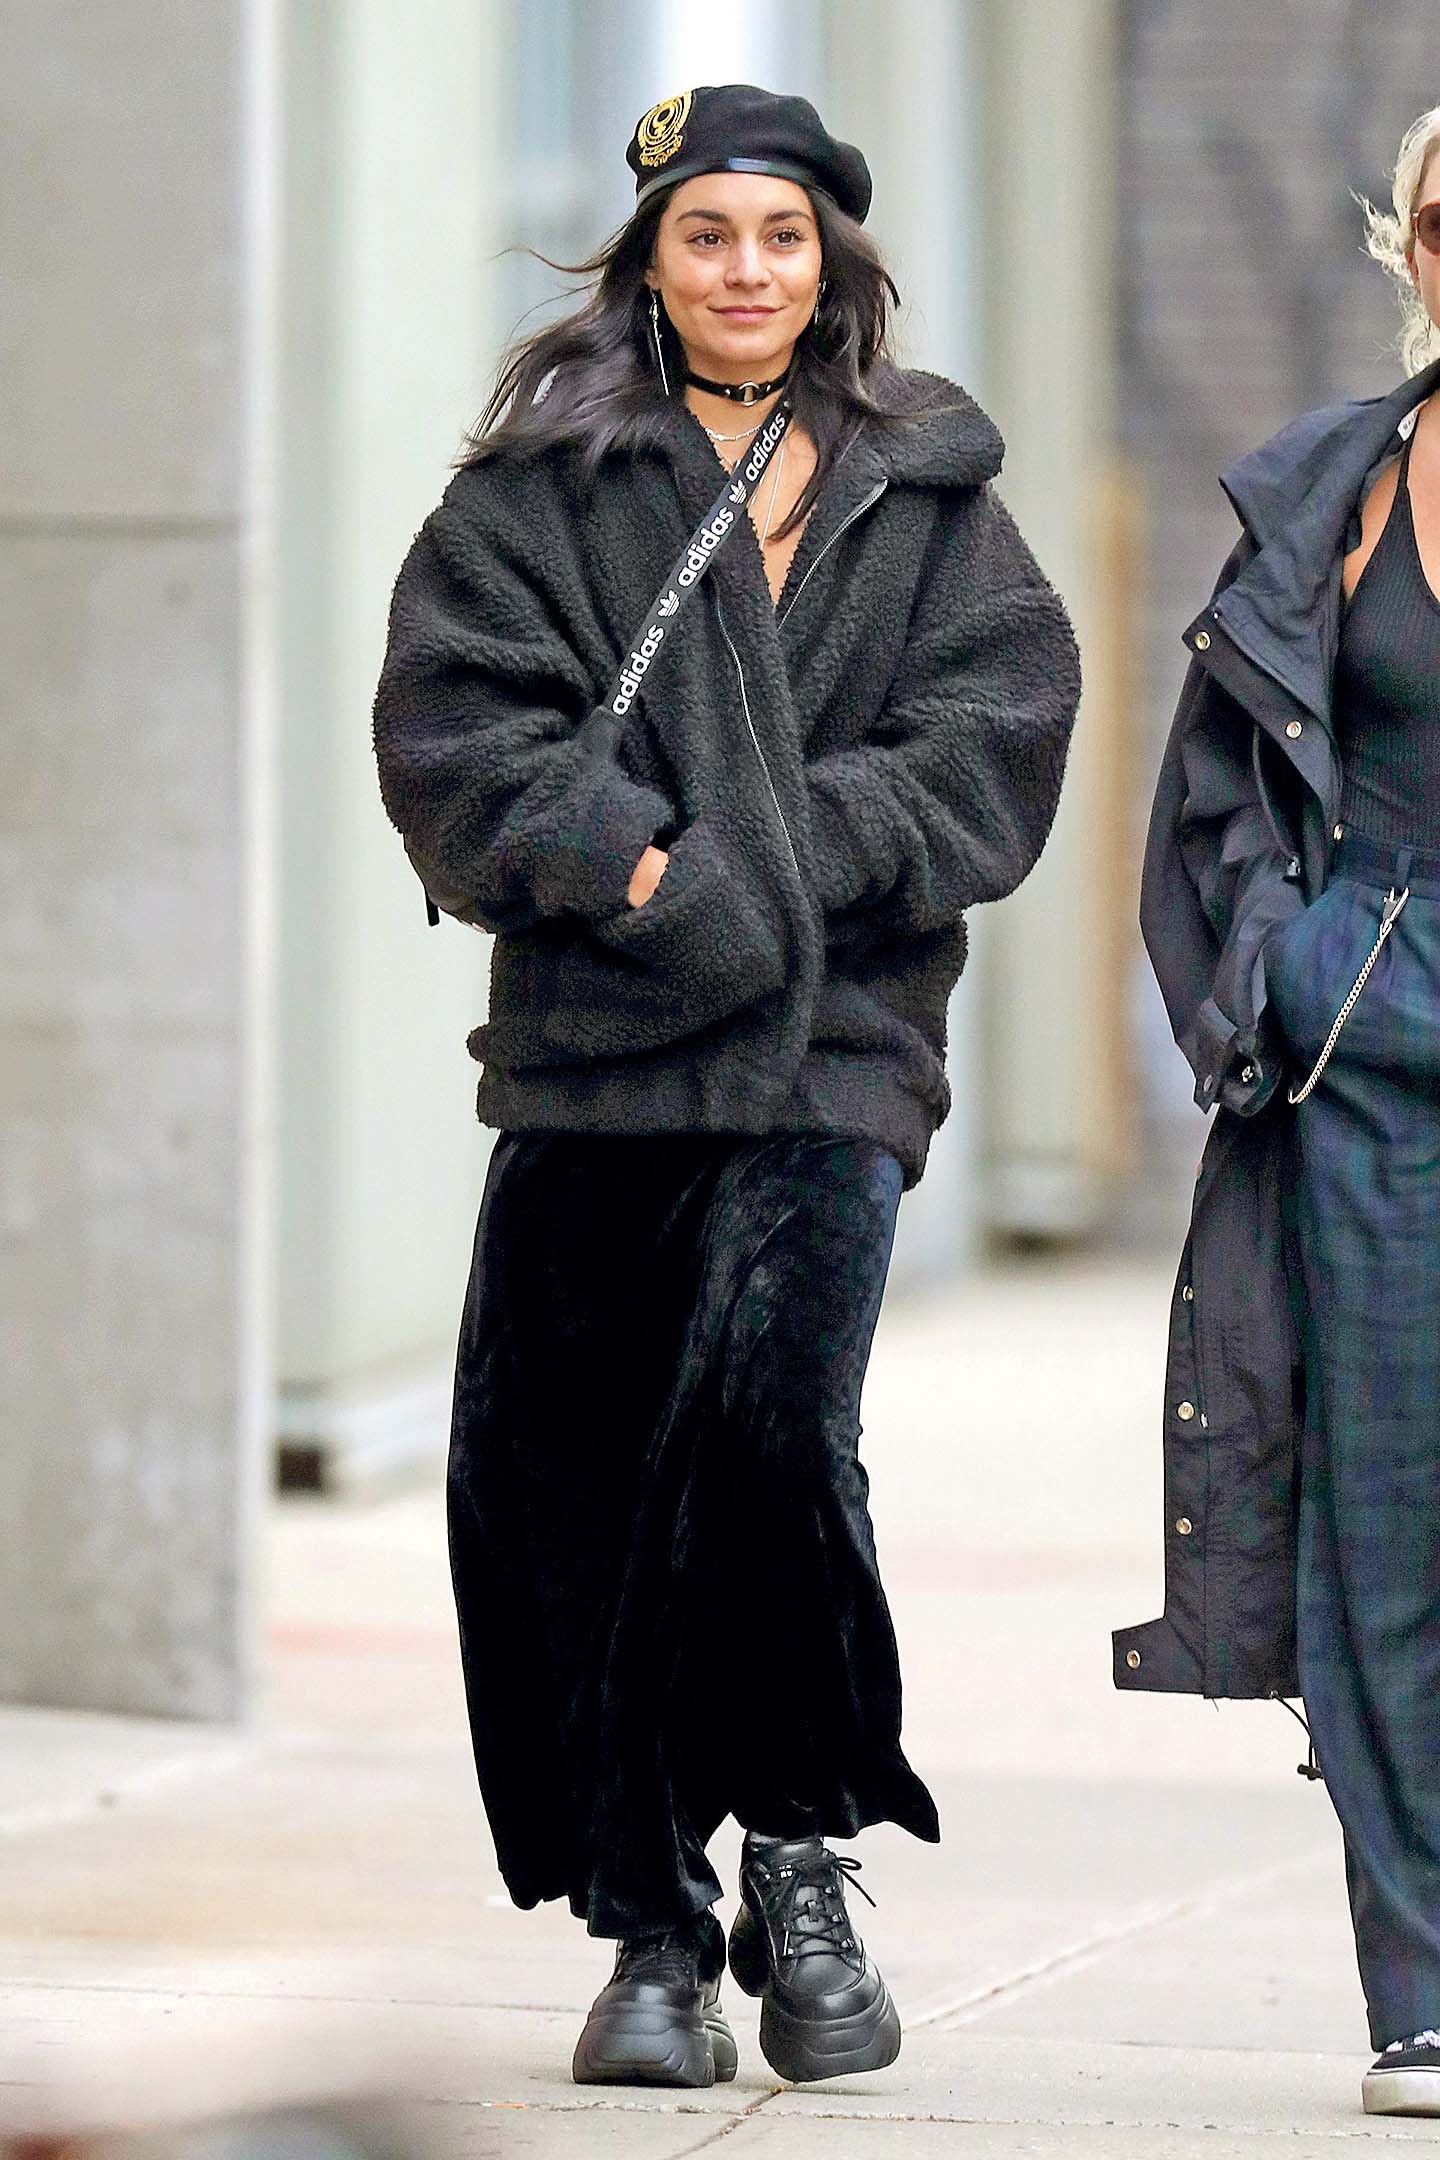 10/12/2019 EXCLUSIVE: Vanessa Hudgens is Spotted Out in New York City. The 30 year old American actress and singer walked arm in arm with a female friend wearing a long black velvet dress, black boots, black beret and shades., Image: 476506399, License: Rights-managed, Restrictions: Exclusive NO usage without agreed price and terms. Please contact sales@theimagedirect.com, Model Release: no, Credit line: TheImageDirect.com / The Image Direct / Profimedia